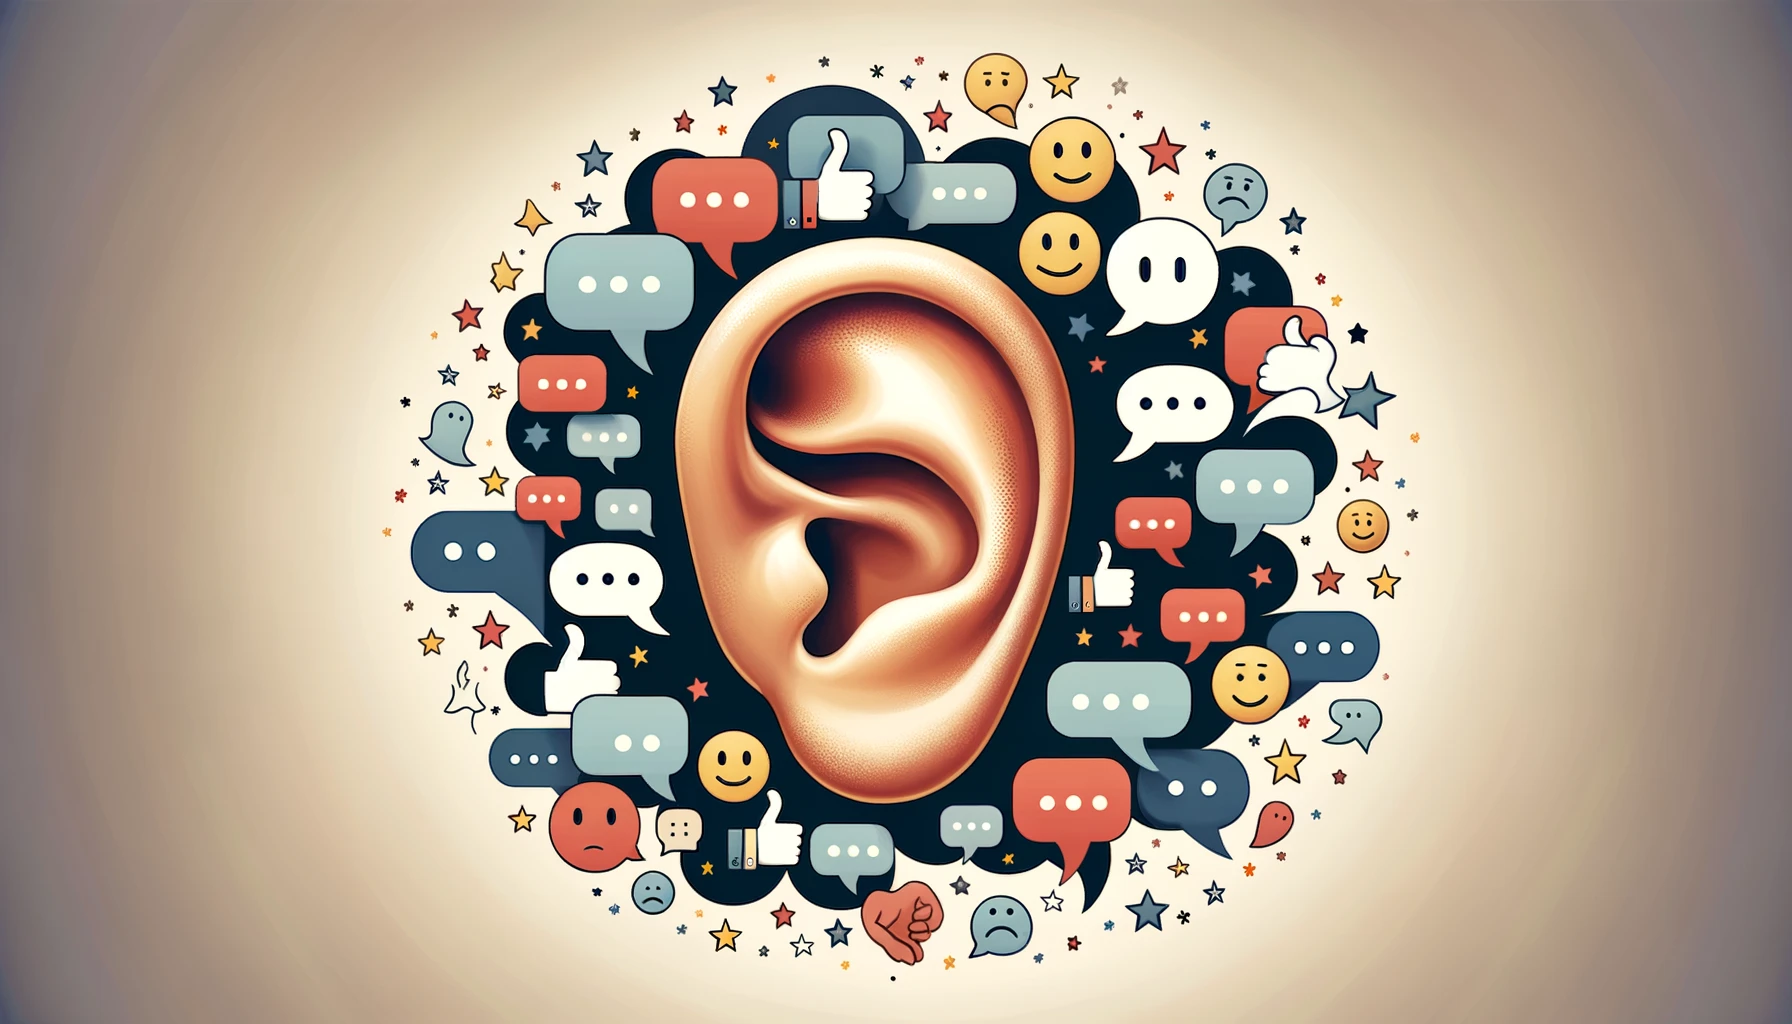 An ear centered in a wide image, surrounded by speech bubbles containing symbols of online customer feedback. Scattered around are thumbs up, thumbs down, smiley faces, and frowny faces, illustrating a company's engagement with feedback for conversion rate optimization through their online marketing.